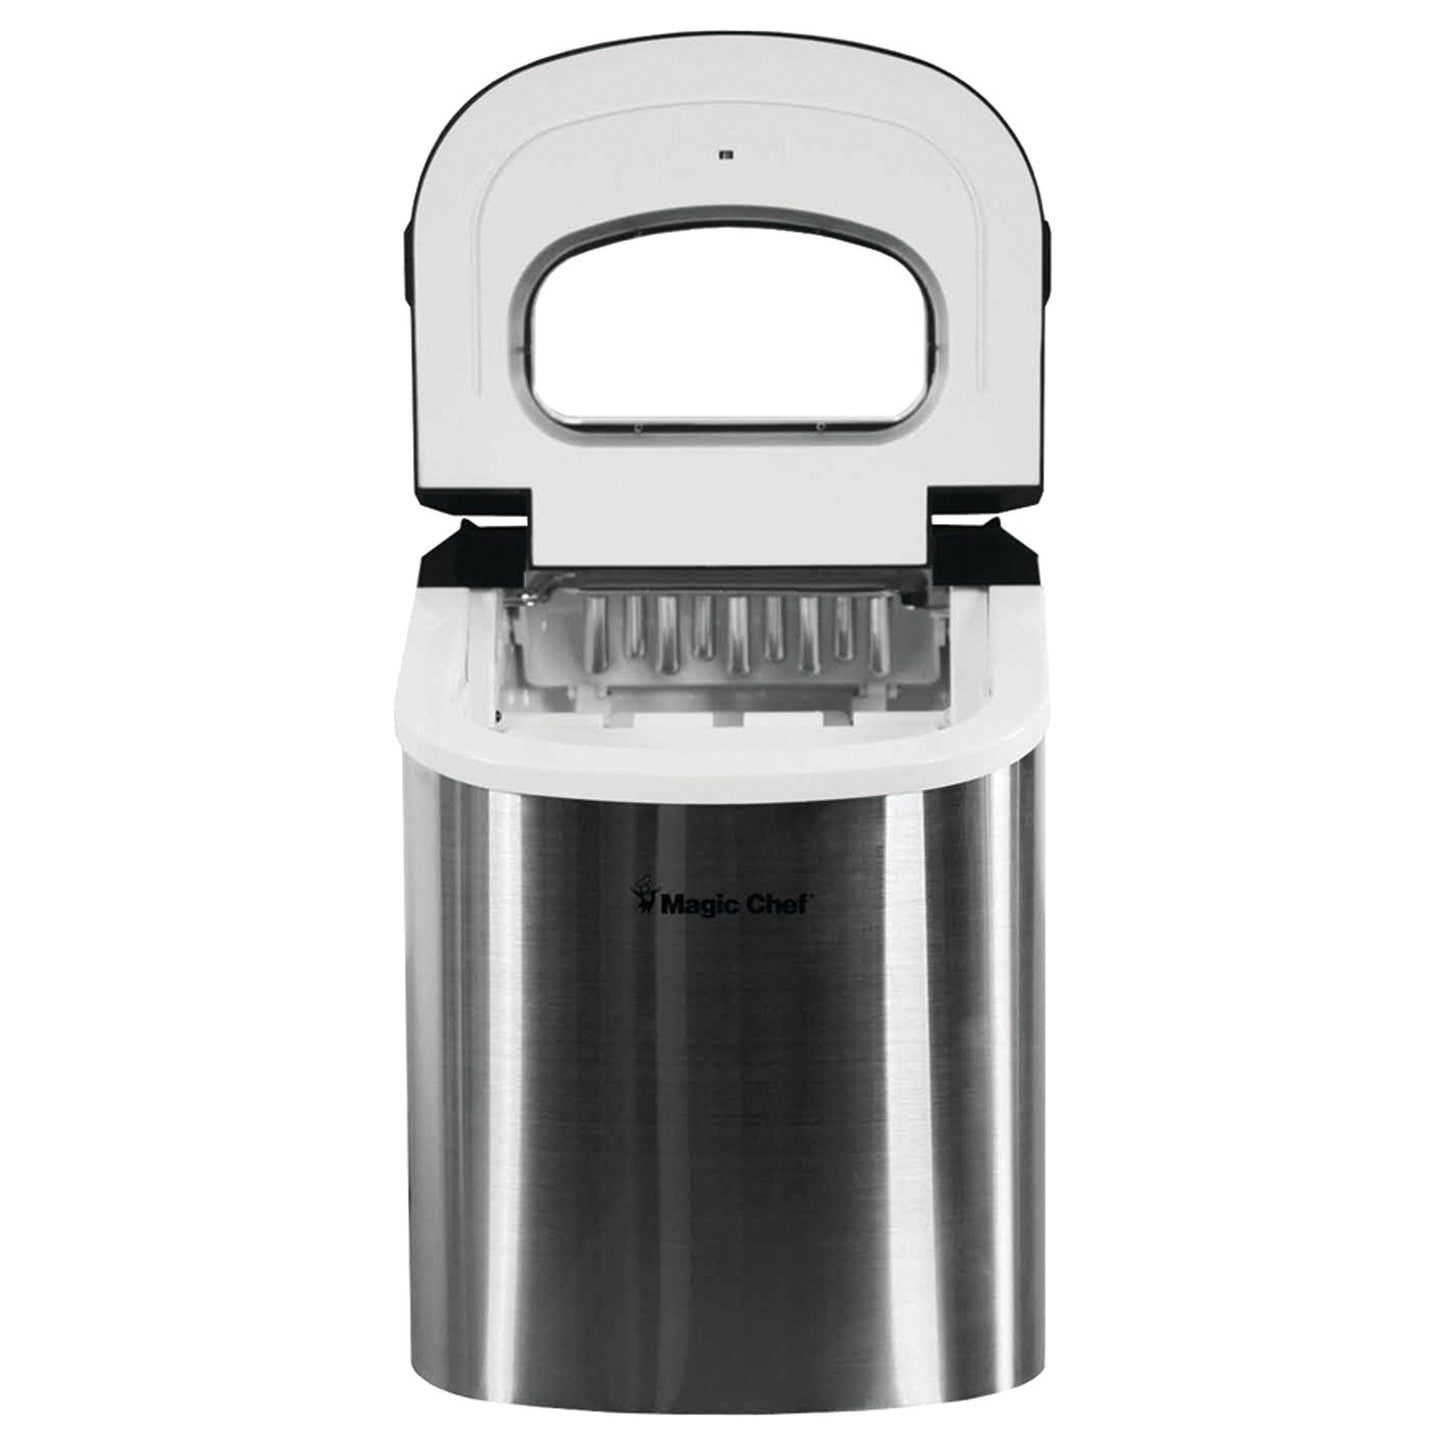 Magic Chef MCIM22ST 27-Pound-Capacity Portable Ice Maker (Stainless w/Black Top)